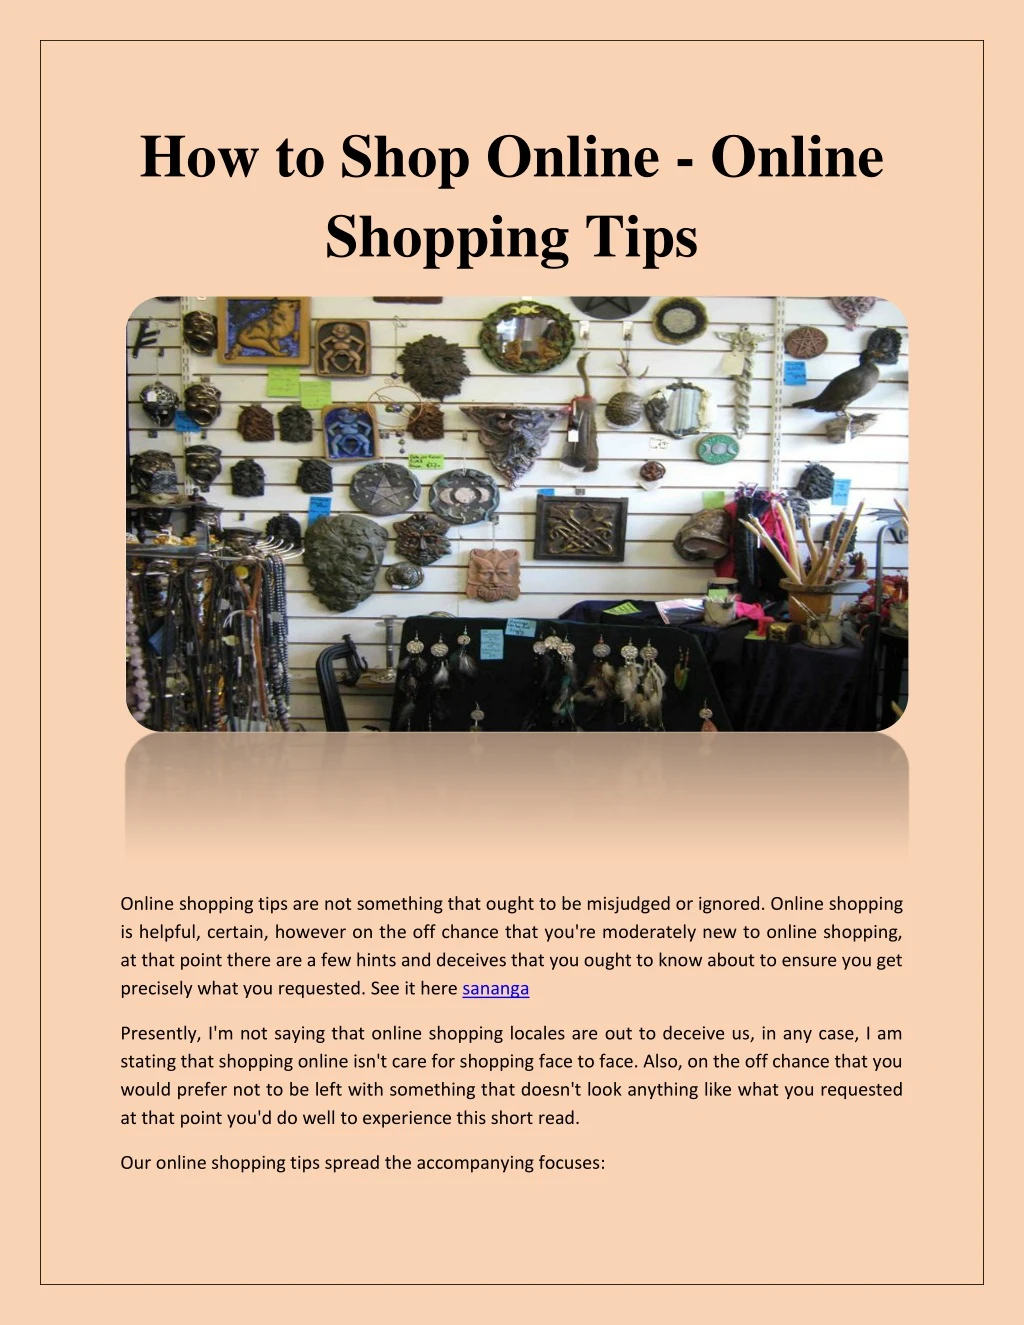 how to shop online online shopping tips